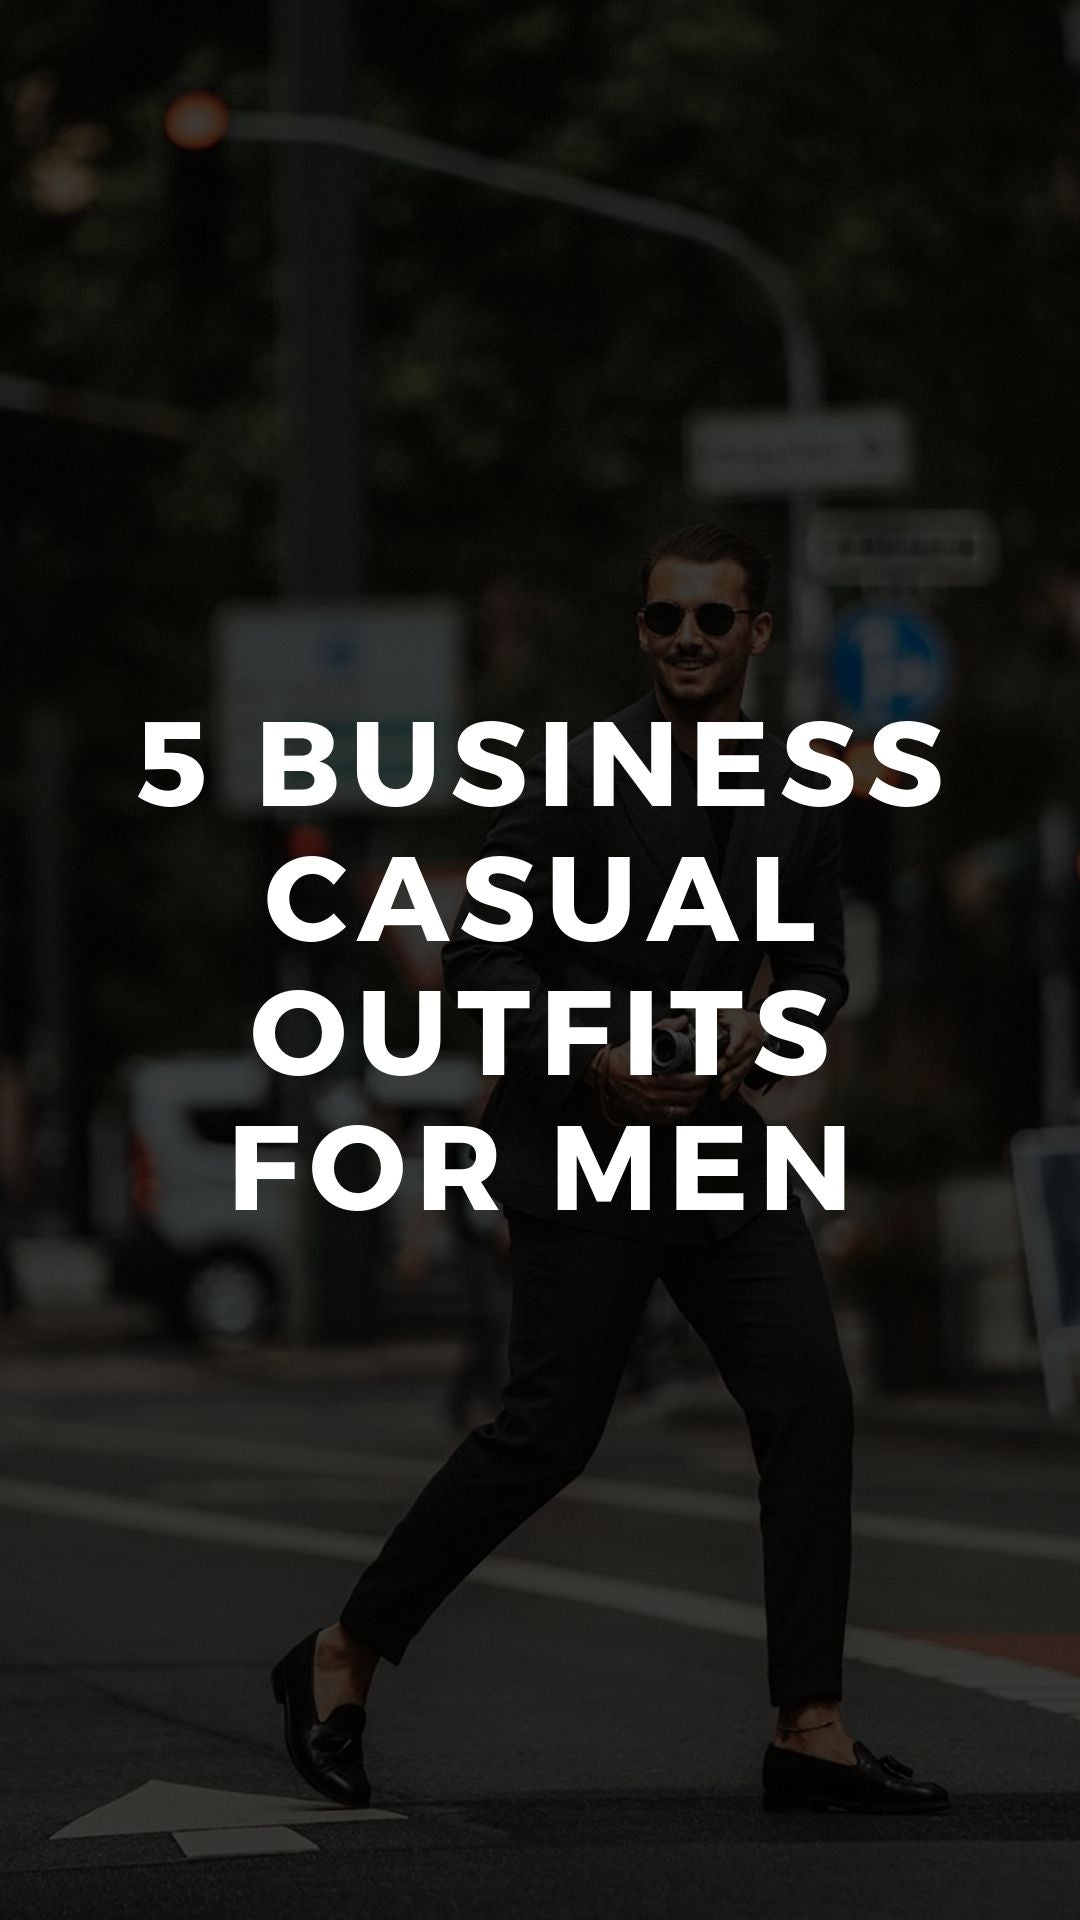 Business causal outfits for men #business #casual #outfits 